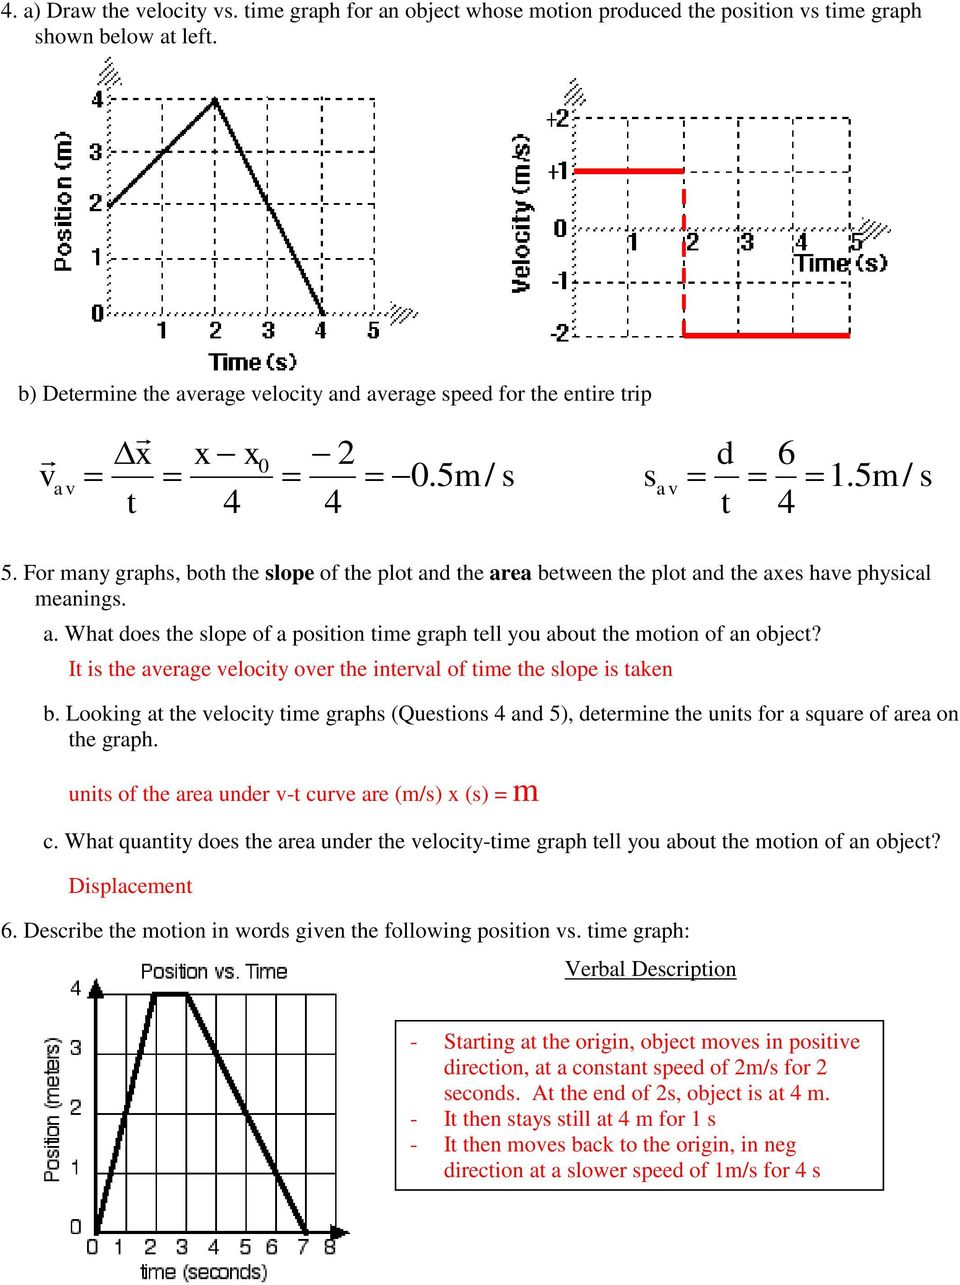 Position And Velocity Vs Time Graphs Worksheet Answers - Nidecmege Throughout Velocity Time Graph Worksheet Answers